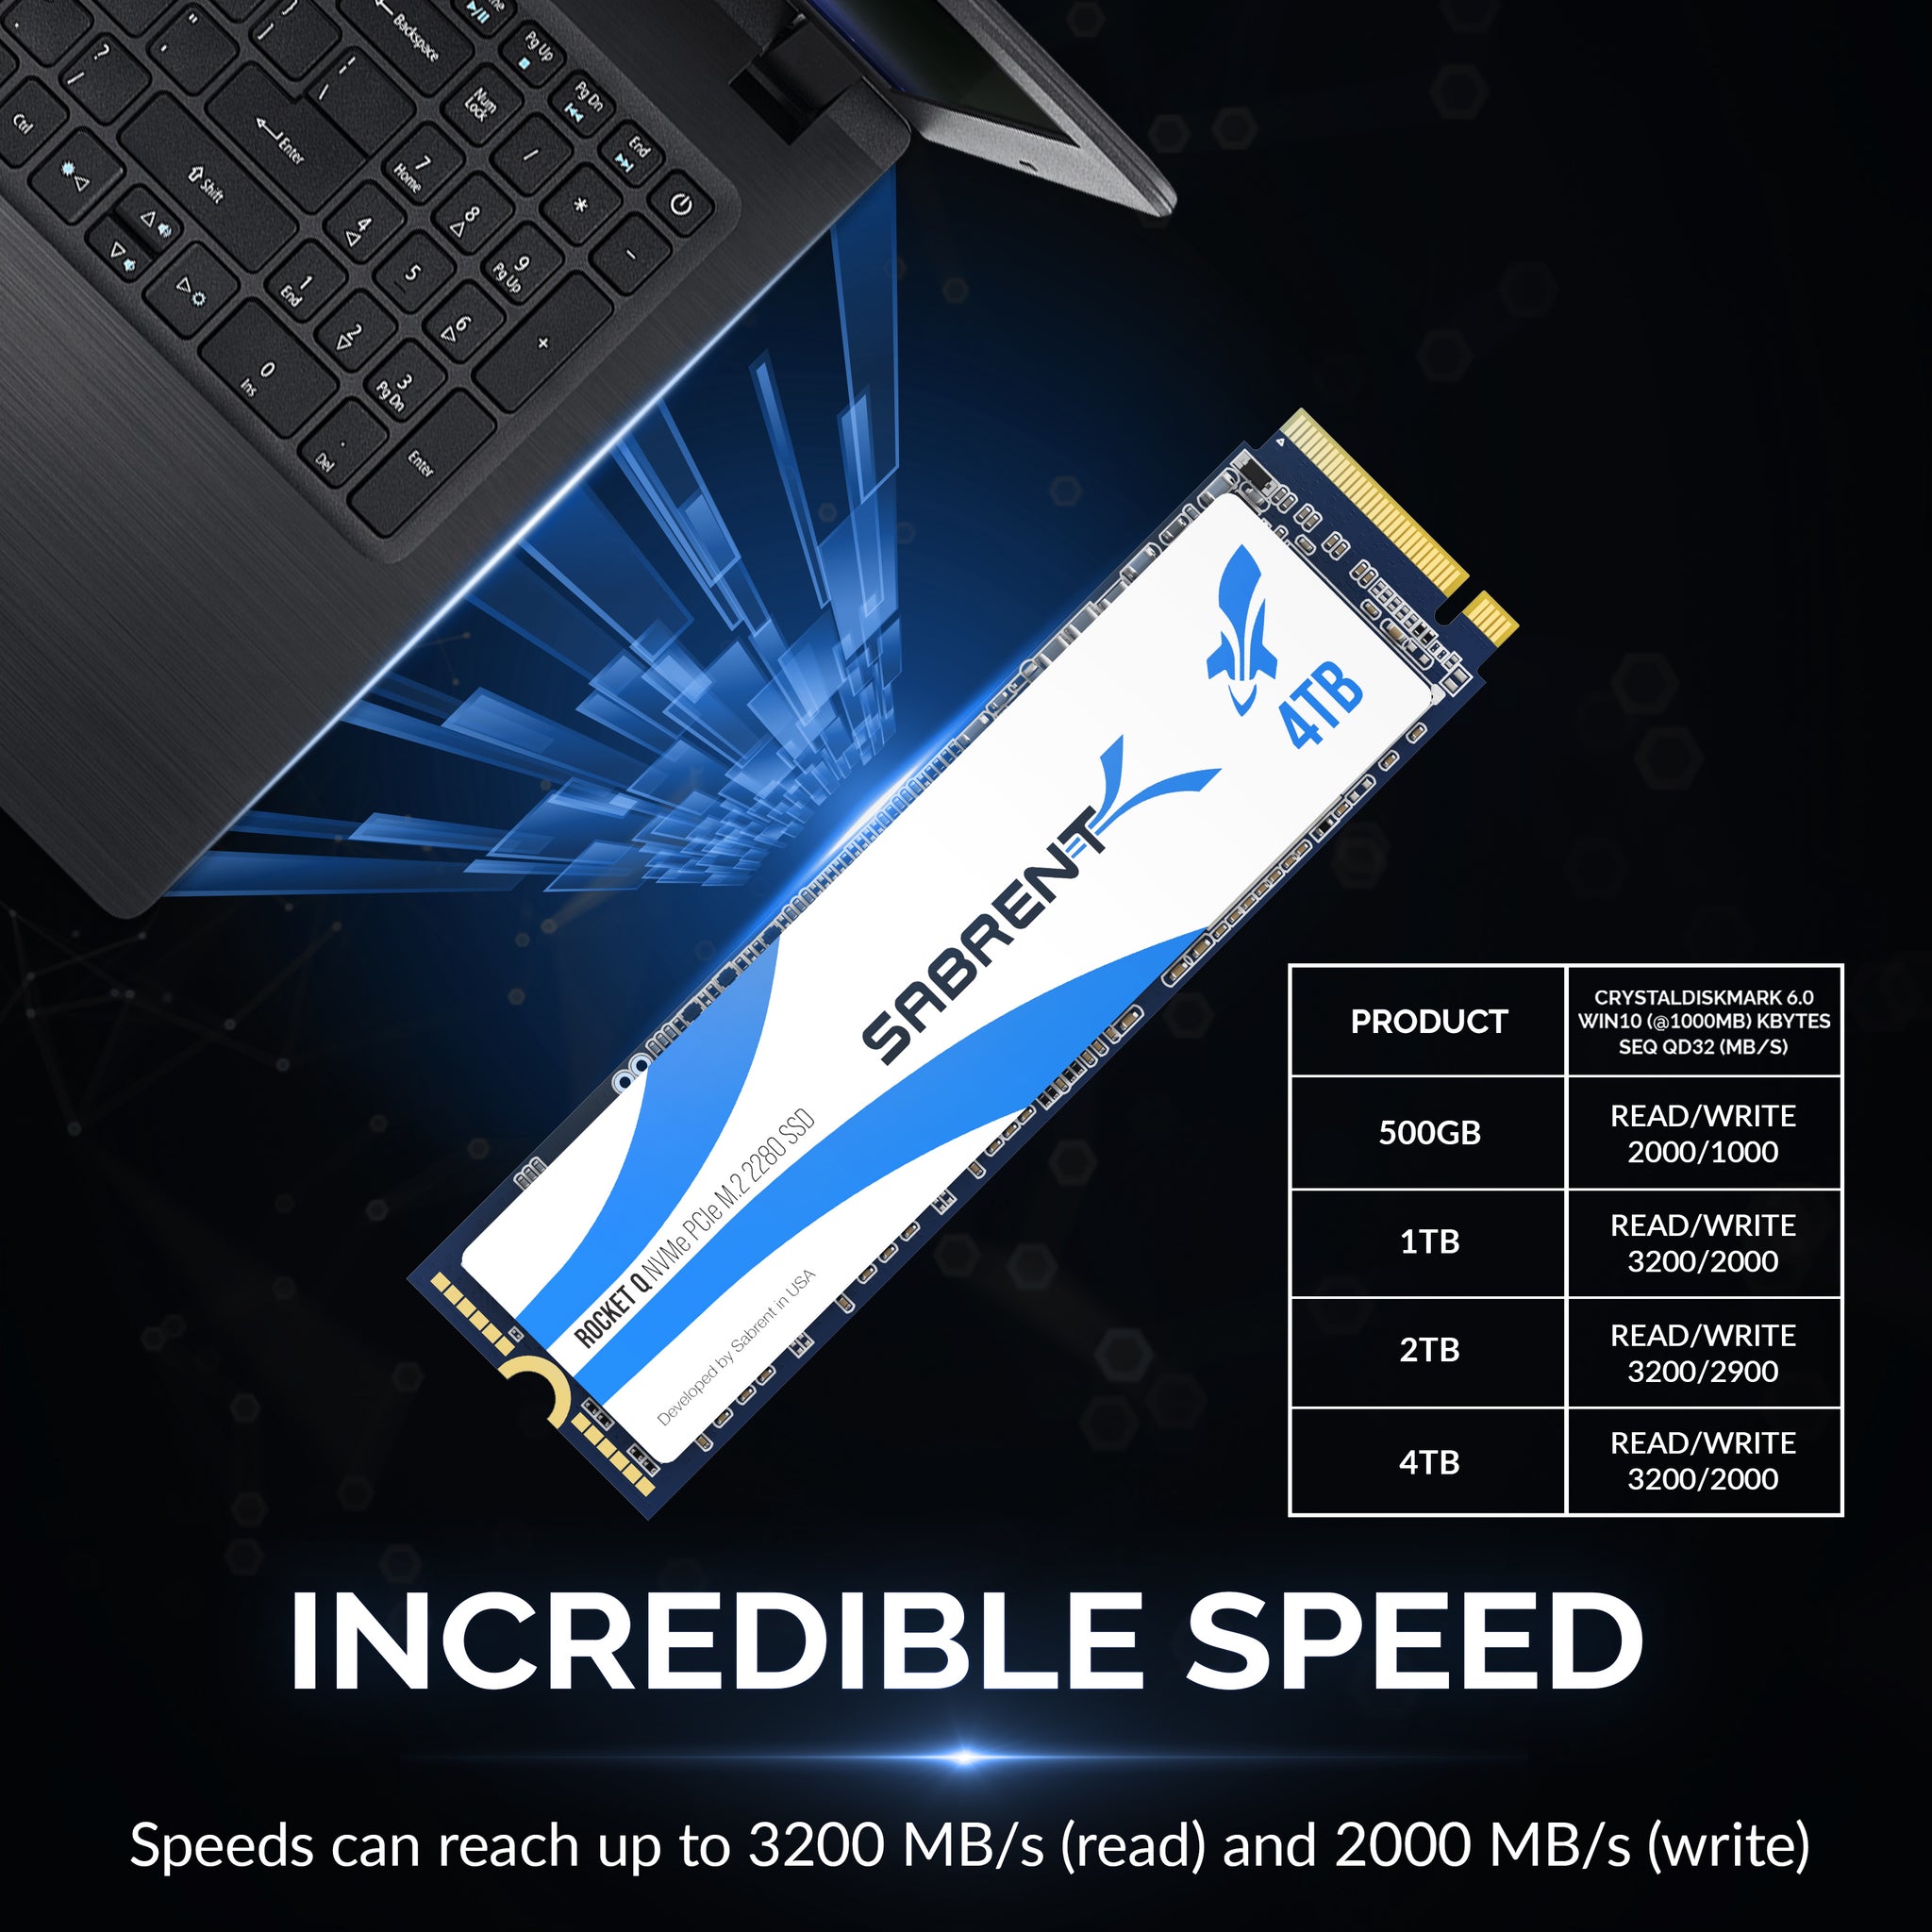 SABRENT M.2 NVMe SSD 4TB Internal Solid State 3450MB/s Read, PCIe 3.0 X4  2280, M2 Hard Drive High Performance Compatible with PCs, NUCs Laptops, and